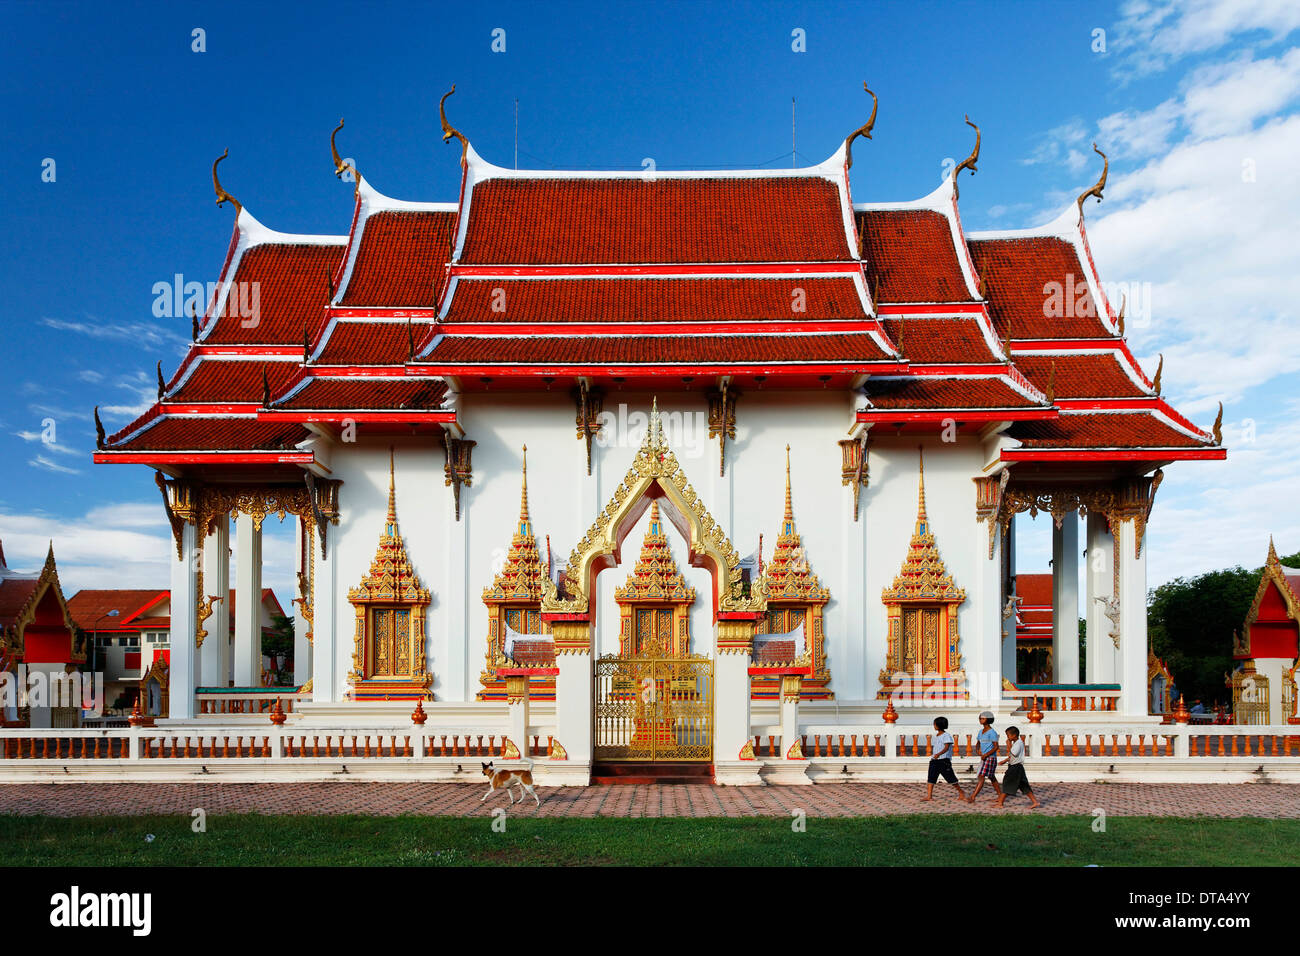 Children playing in front of Wat Chalong temple, Phuket, Thailand Stock Photo